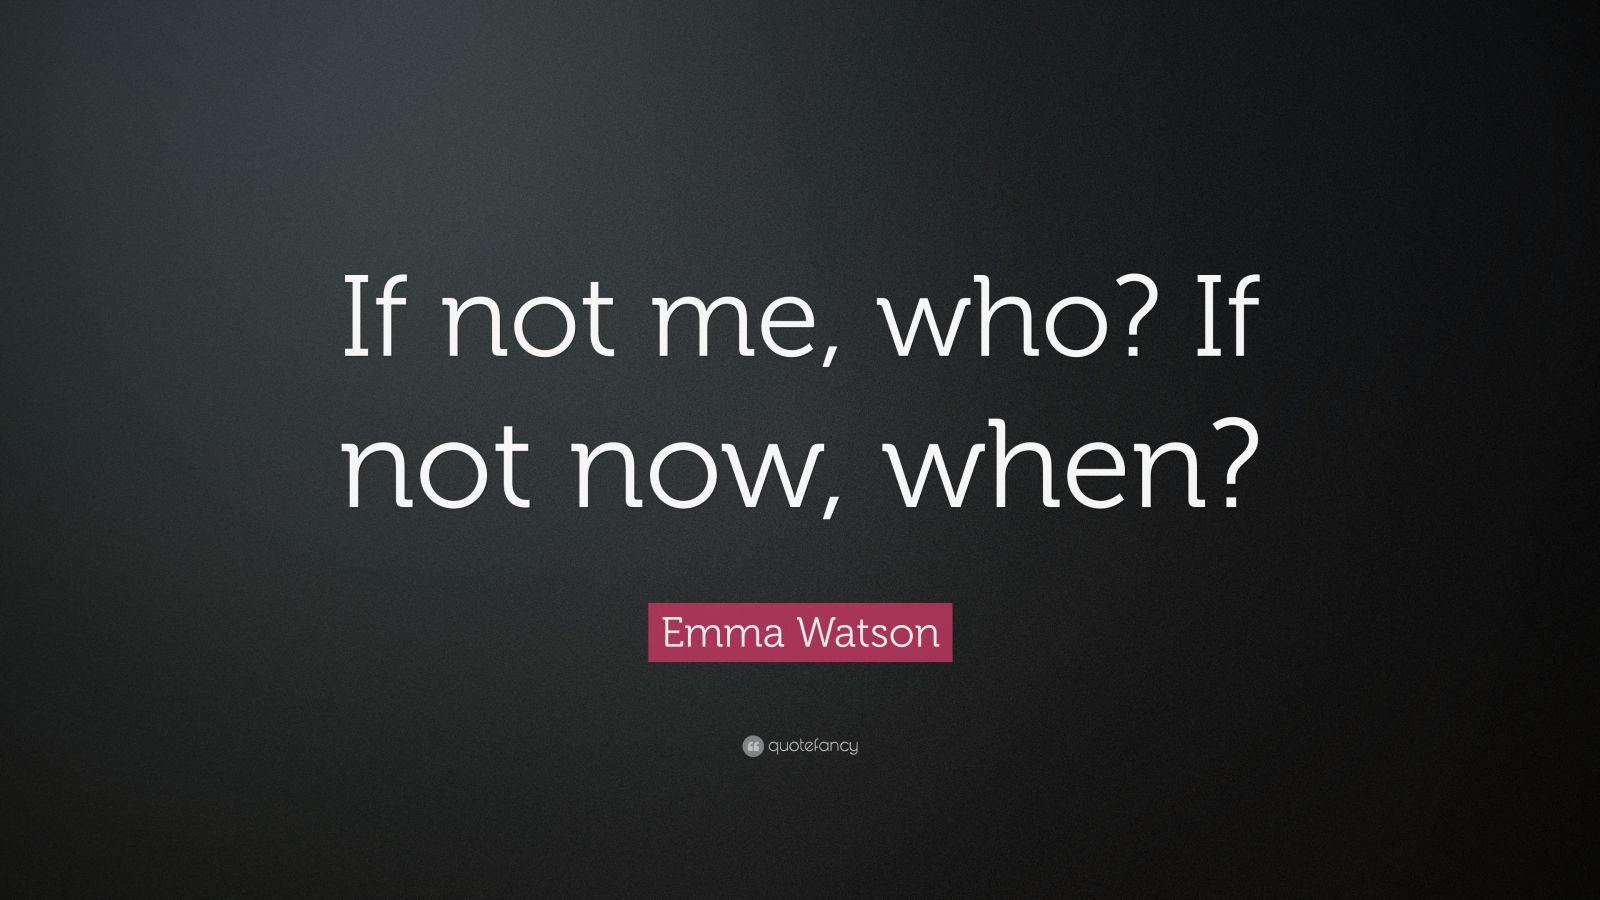 Emma Watson Quote “If not me, who? If not now, when?” (12